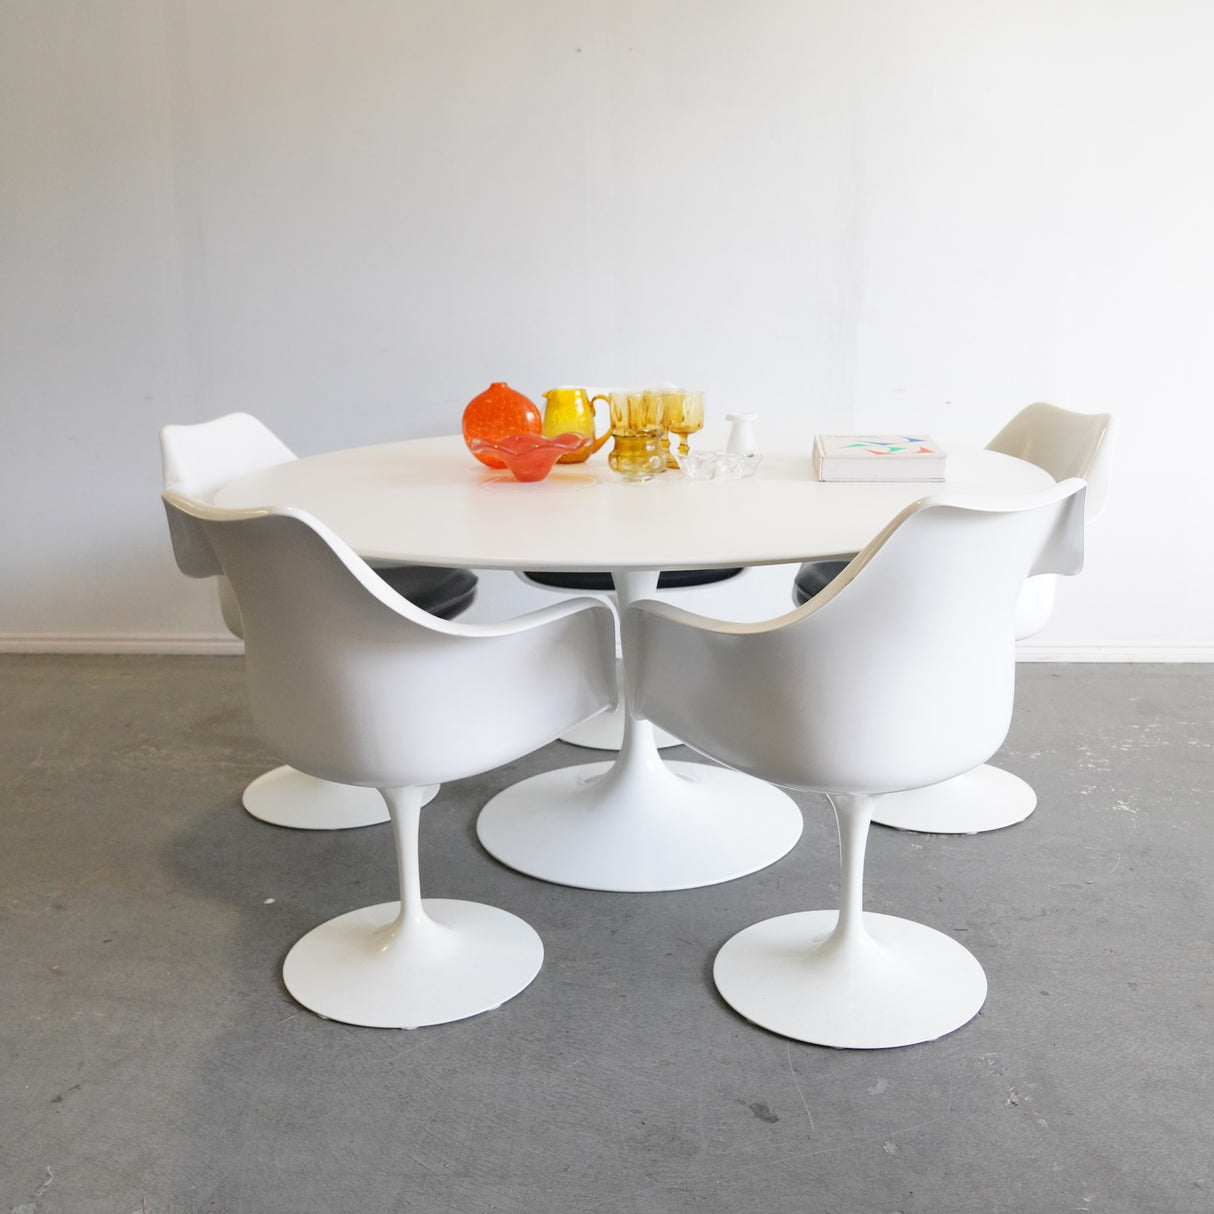 Authentic Knoll iconic Saarinen 60' Round Dining Table